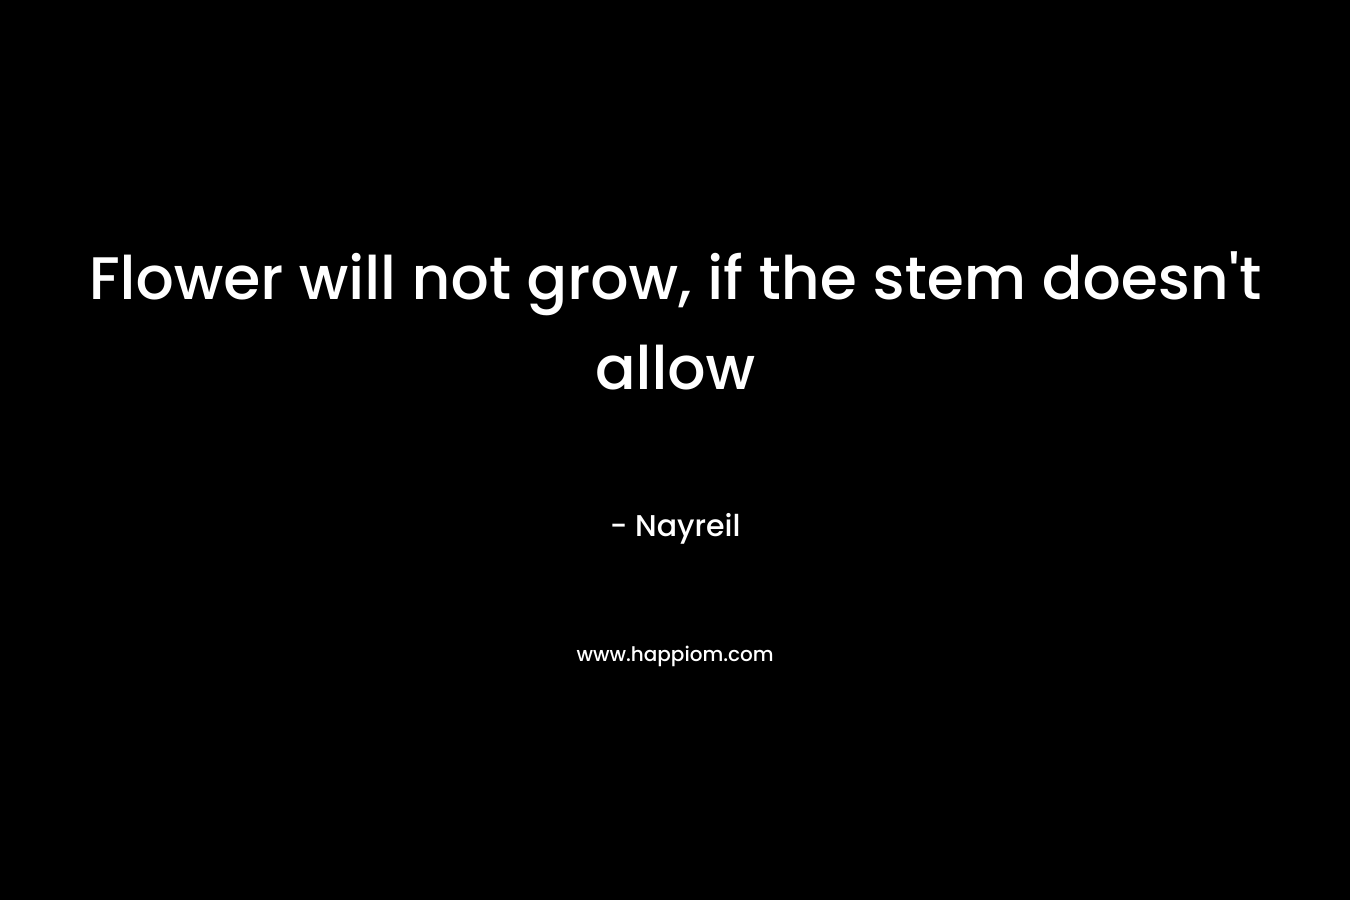 Flower will not grow, if the stem doesn’t allow – Nayreil